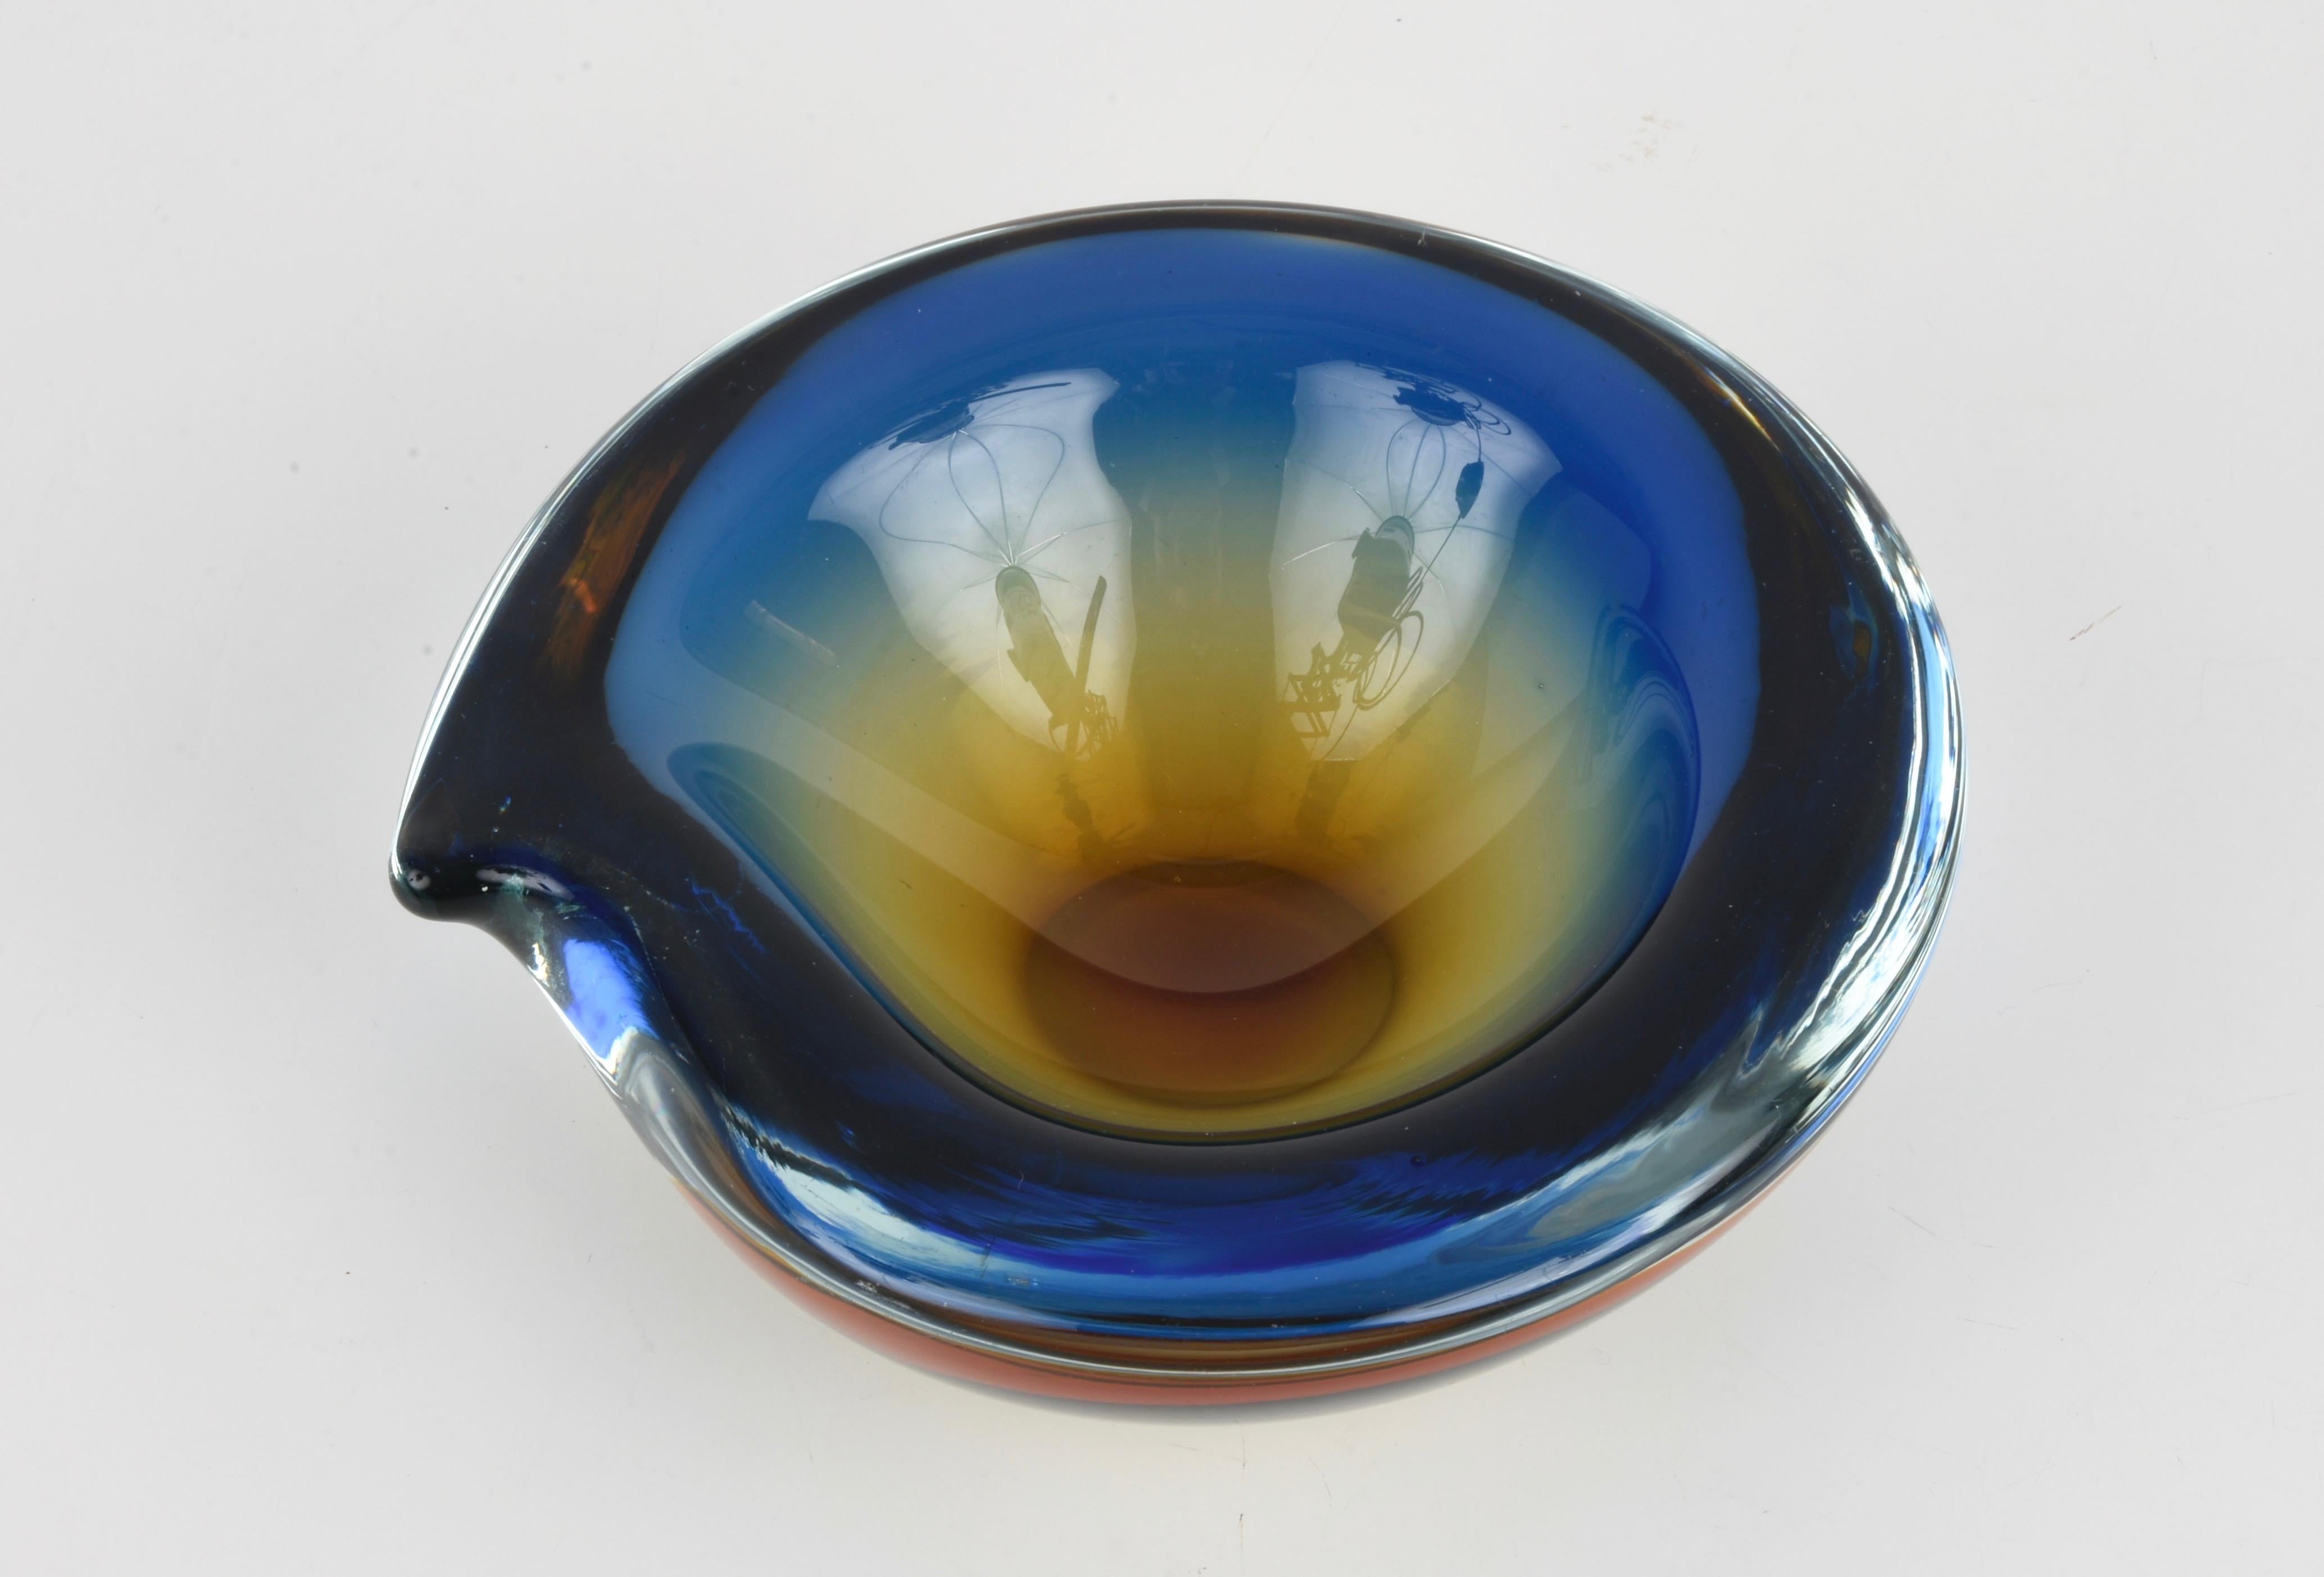 Mid-Century Modern Murano Ashtray or Bowl, Flavio Poli Submerged Glass Amber Blue, Italy, 1960 For Sale